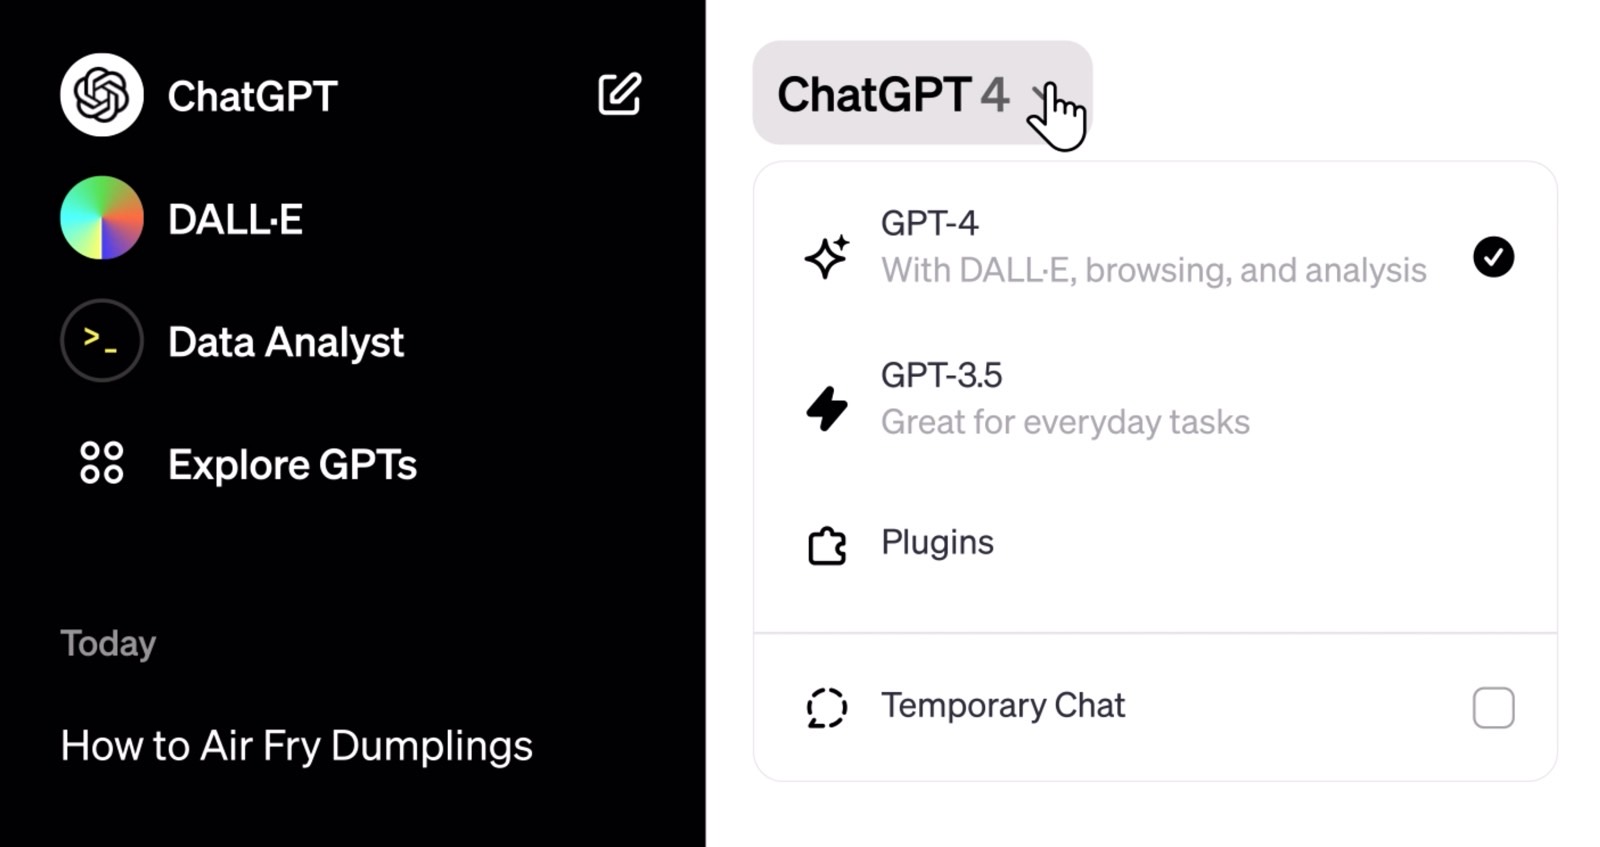 Look for Temporary Chats in the ChatGPT menu, if you want to prevent it from remembering things.